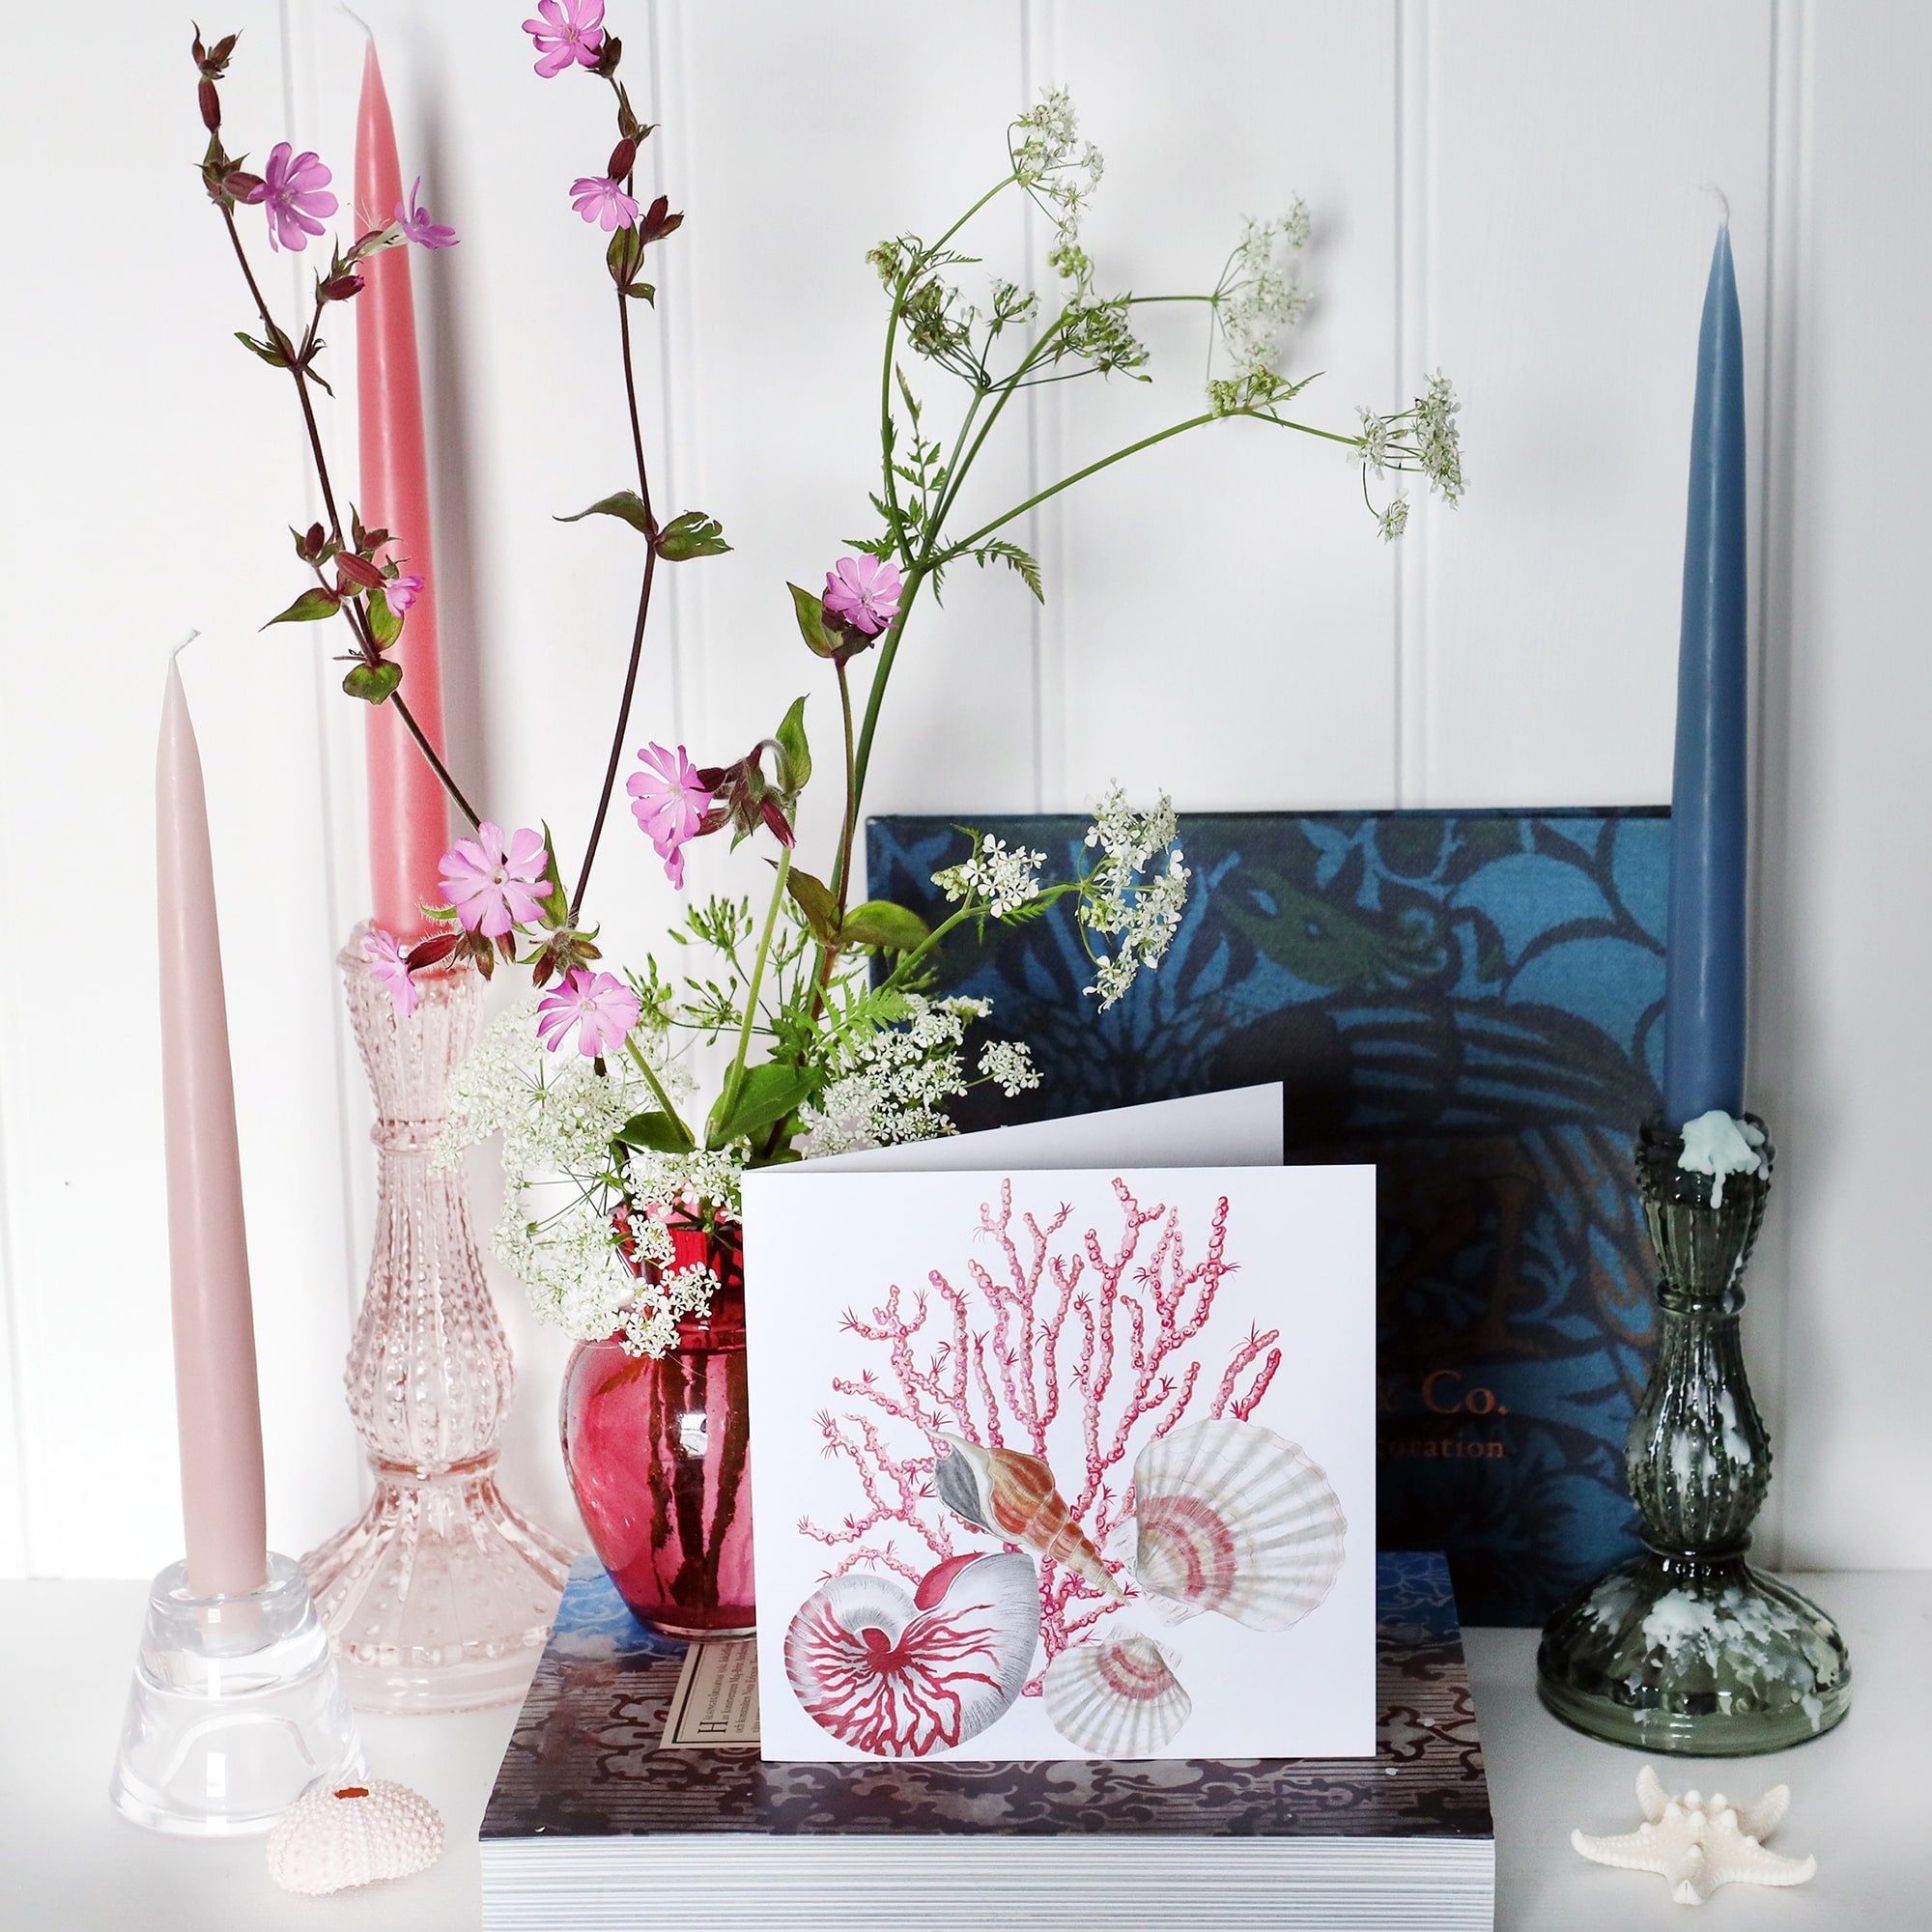 greeting card with illustration of seaweed, nautilus, whelk and scallop shells all in pinks  on a white background on shelf with pink and blue candles in candlesticks and a small cranberry glass jug with wild flowers in